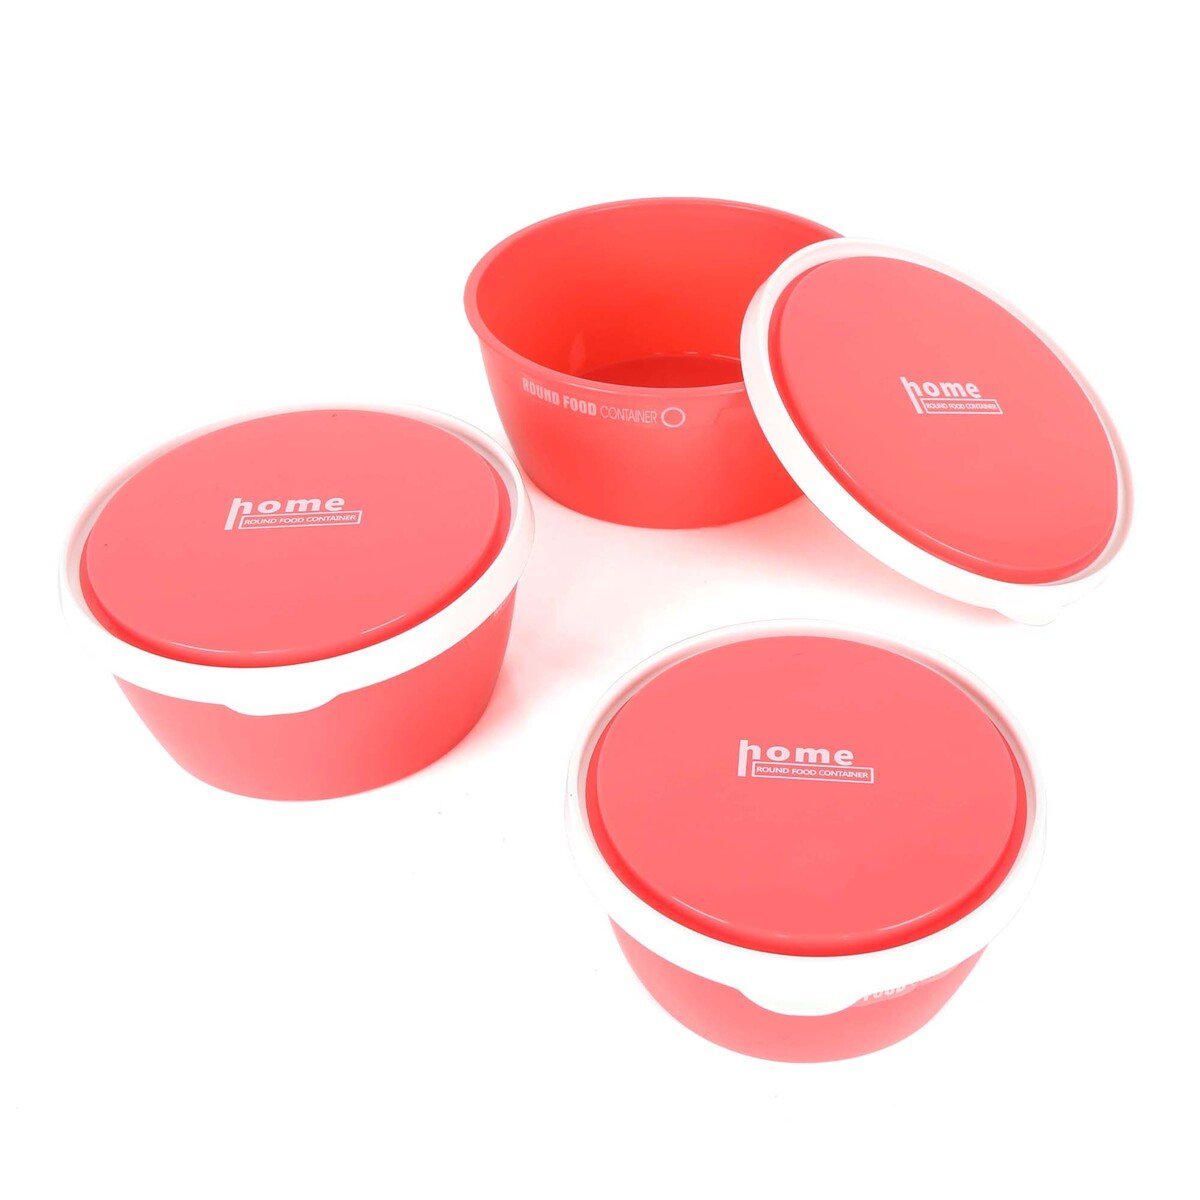 Home Food Containers 3pcs Set 8109